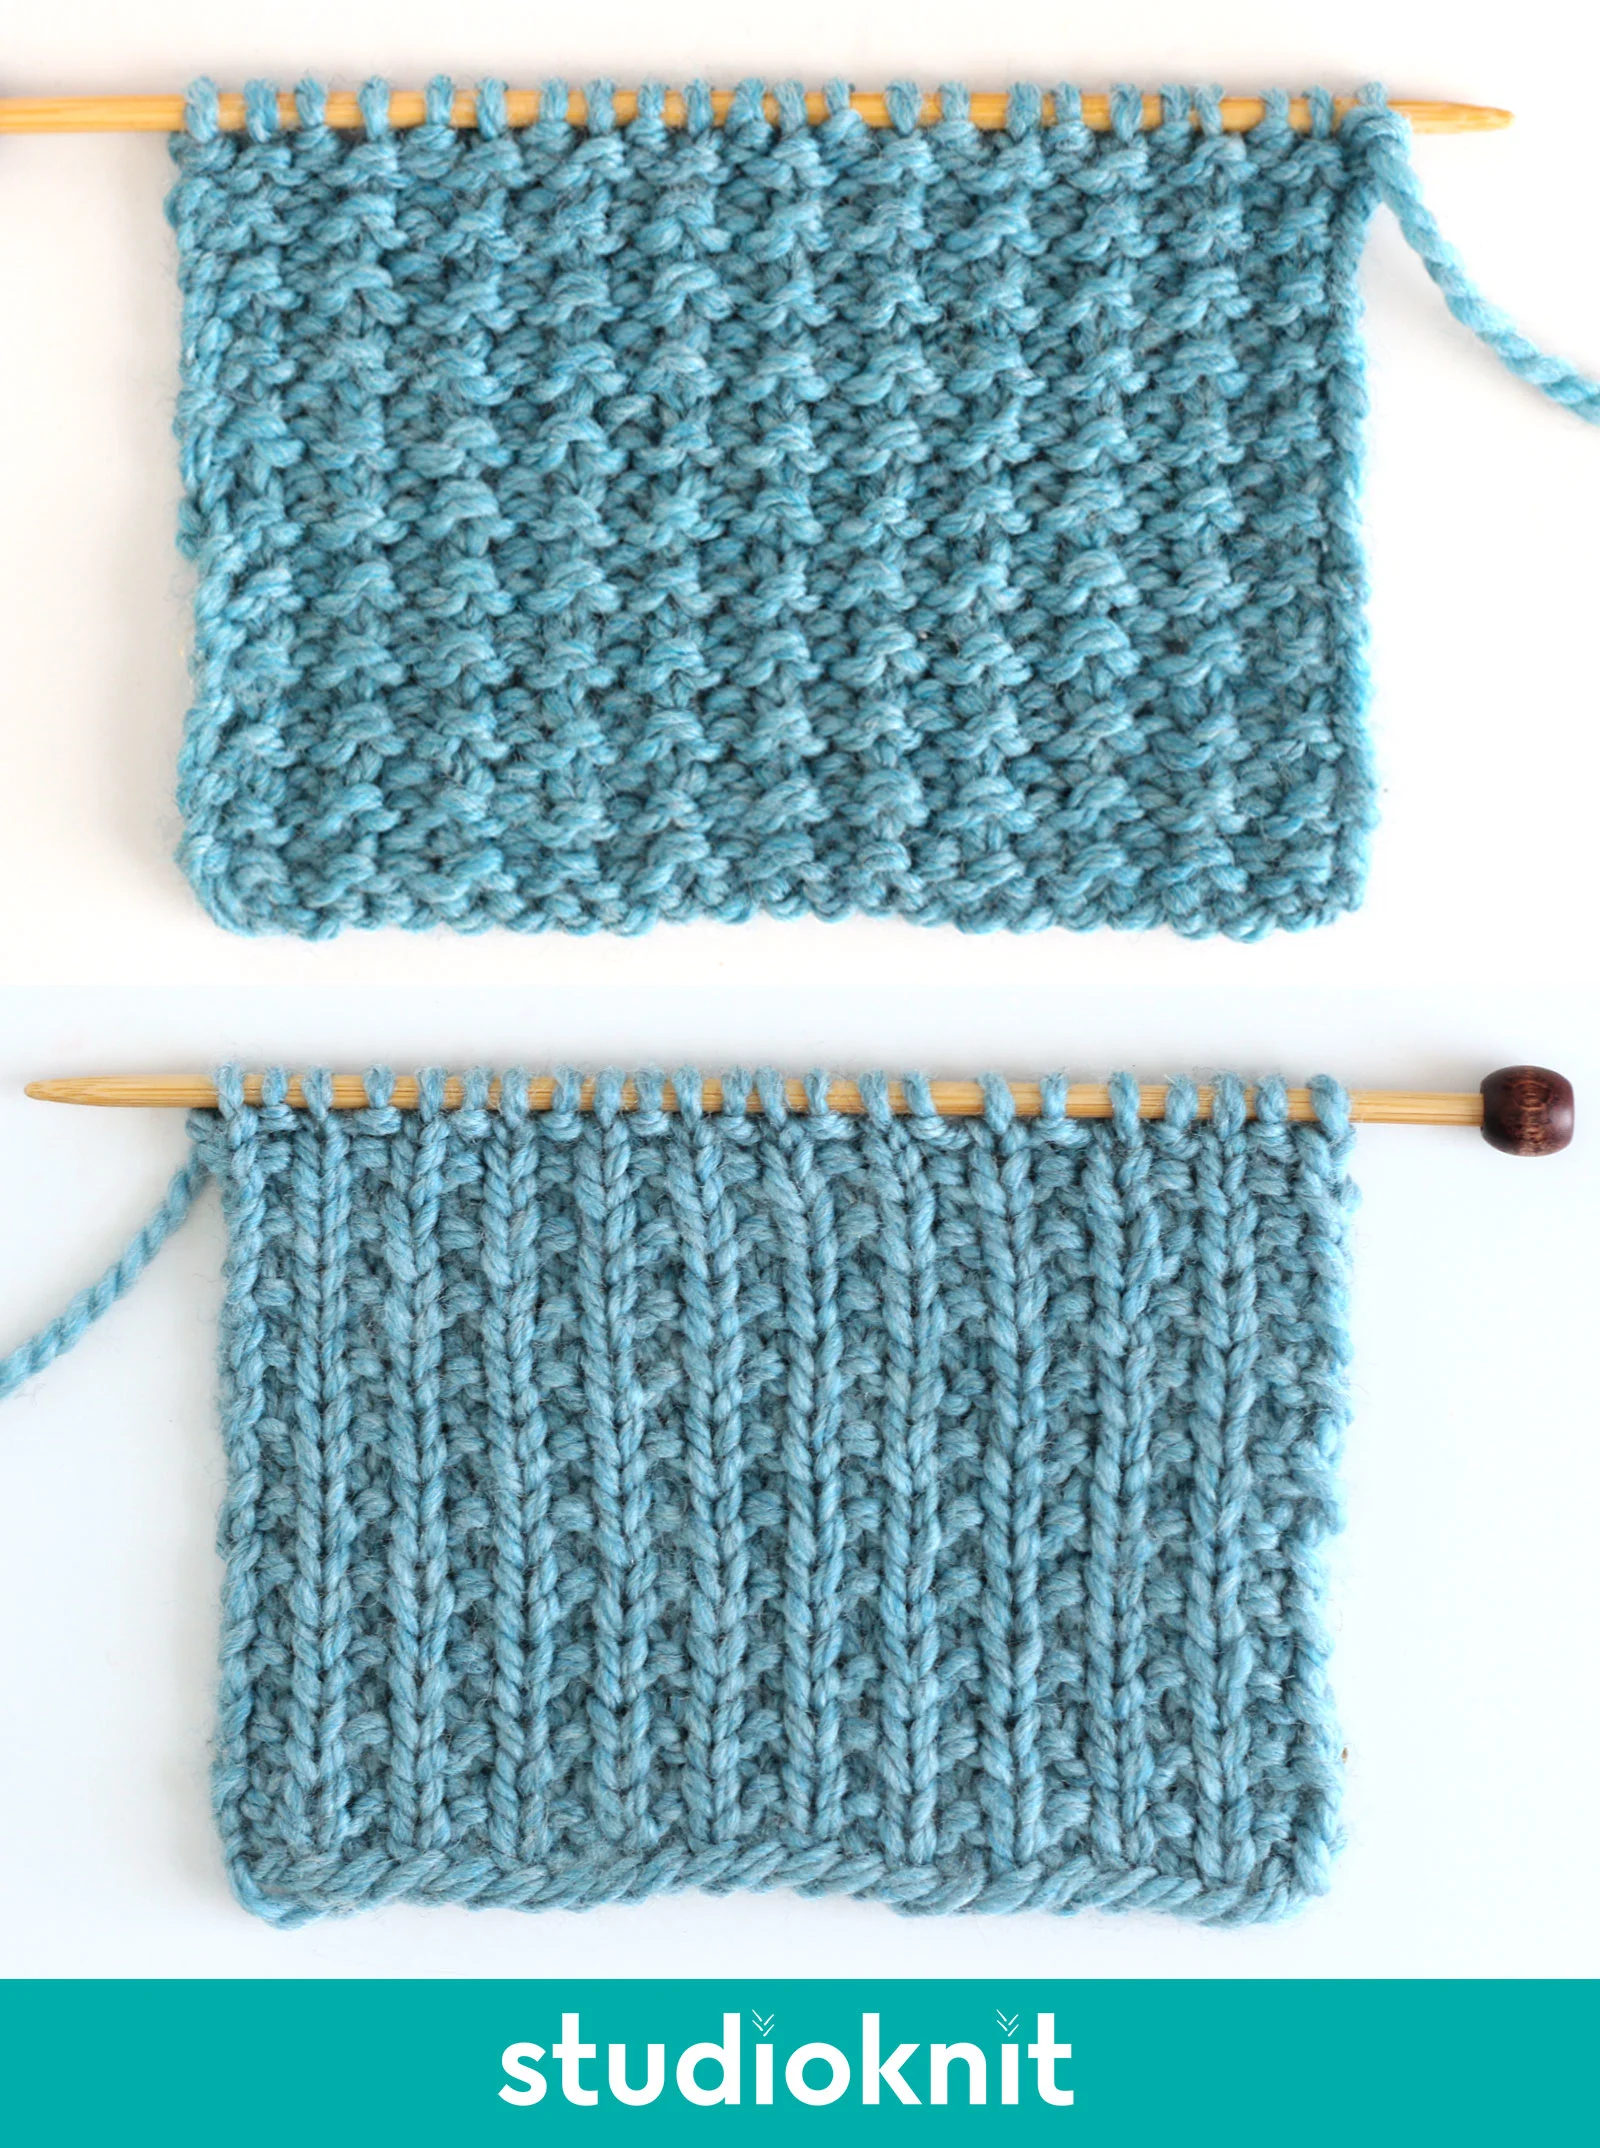 Sand Stitch Knitting Pattern both the right and wrong sides in blue yarn color.